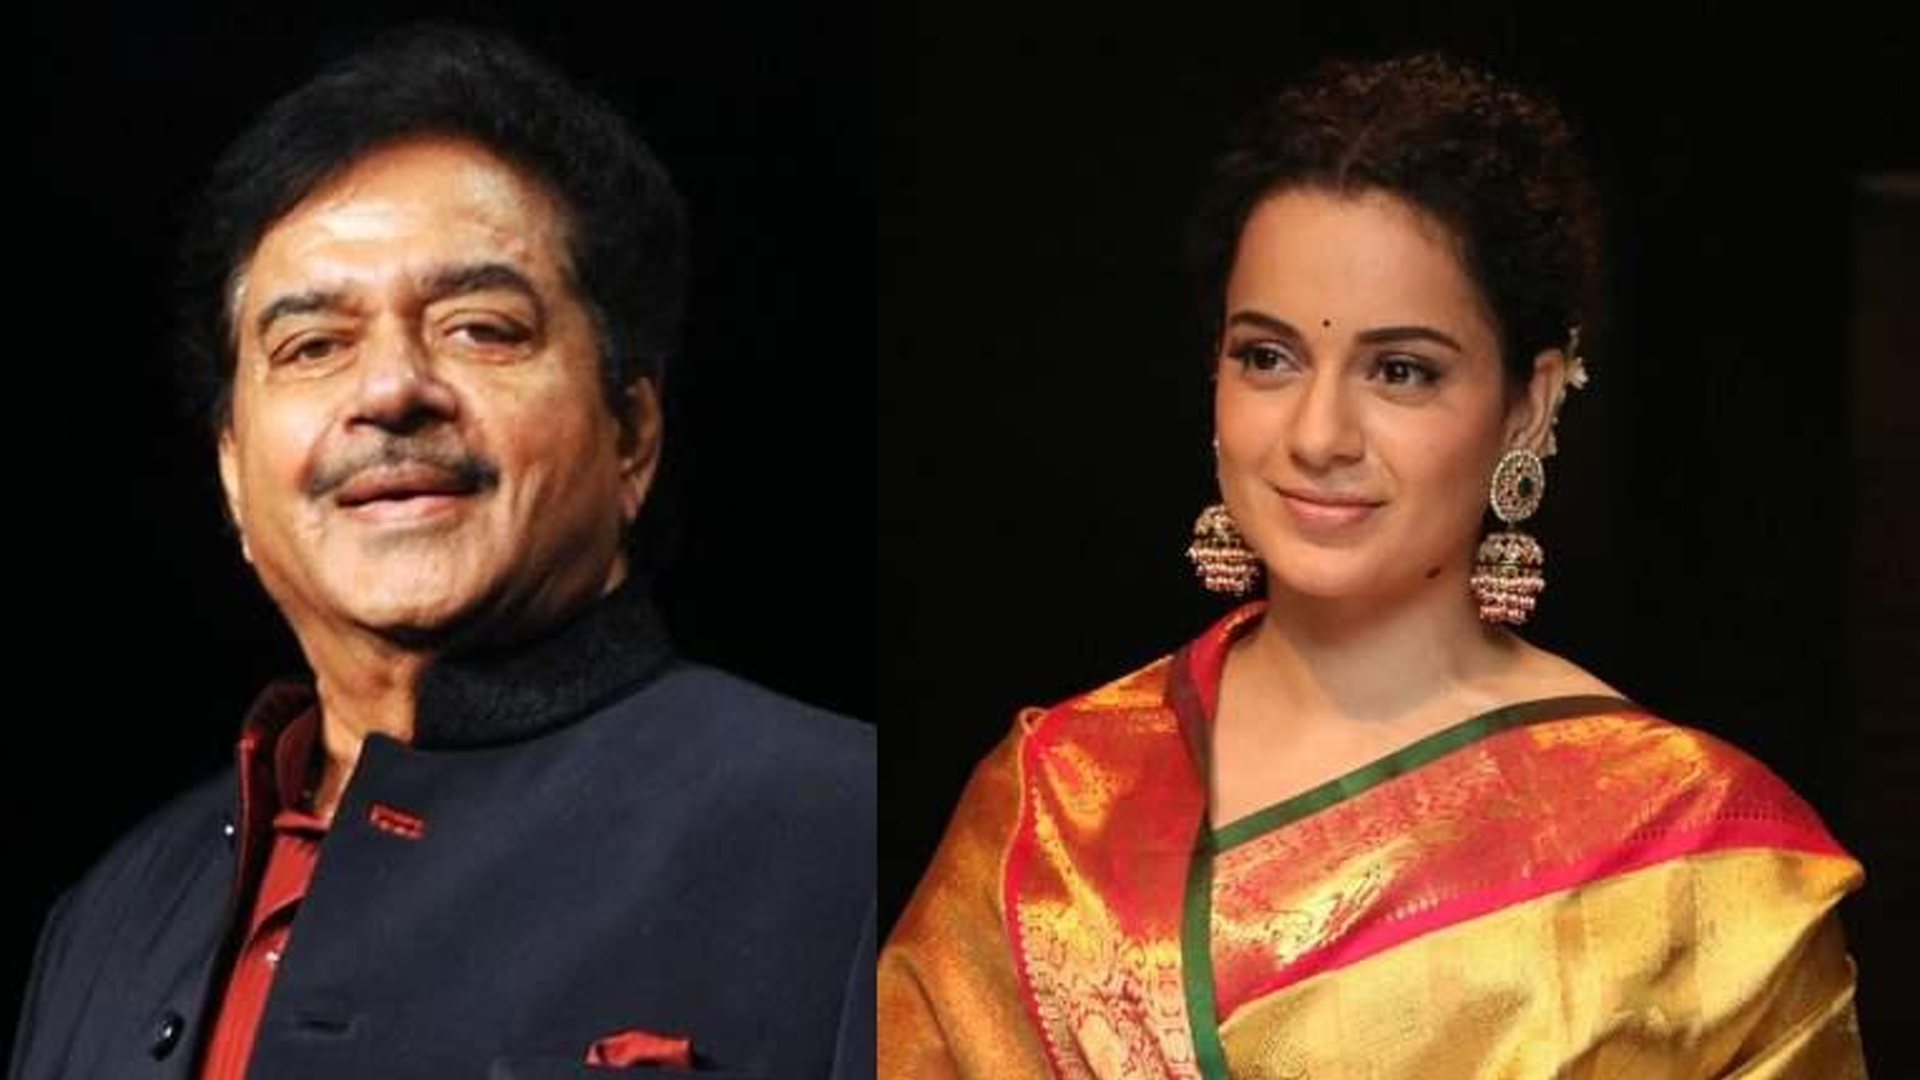 “Kangana commands respect and even remuneration that she is worthy of”: Shatrughan Sinha